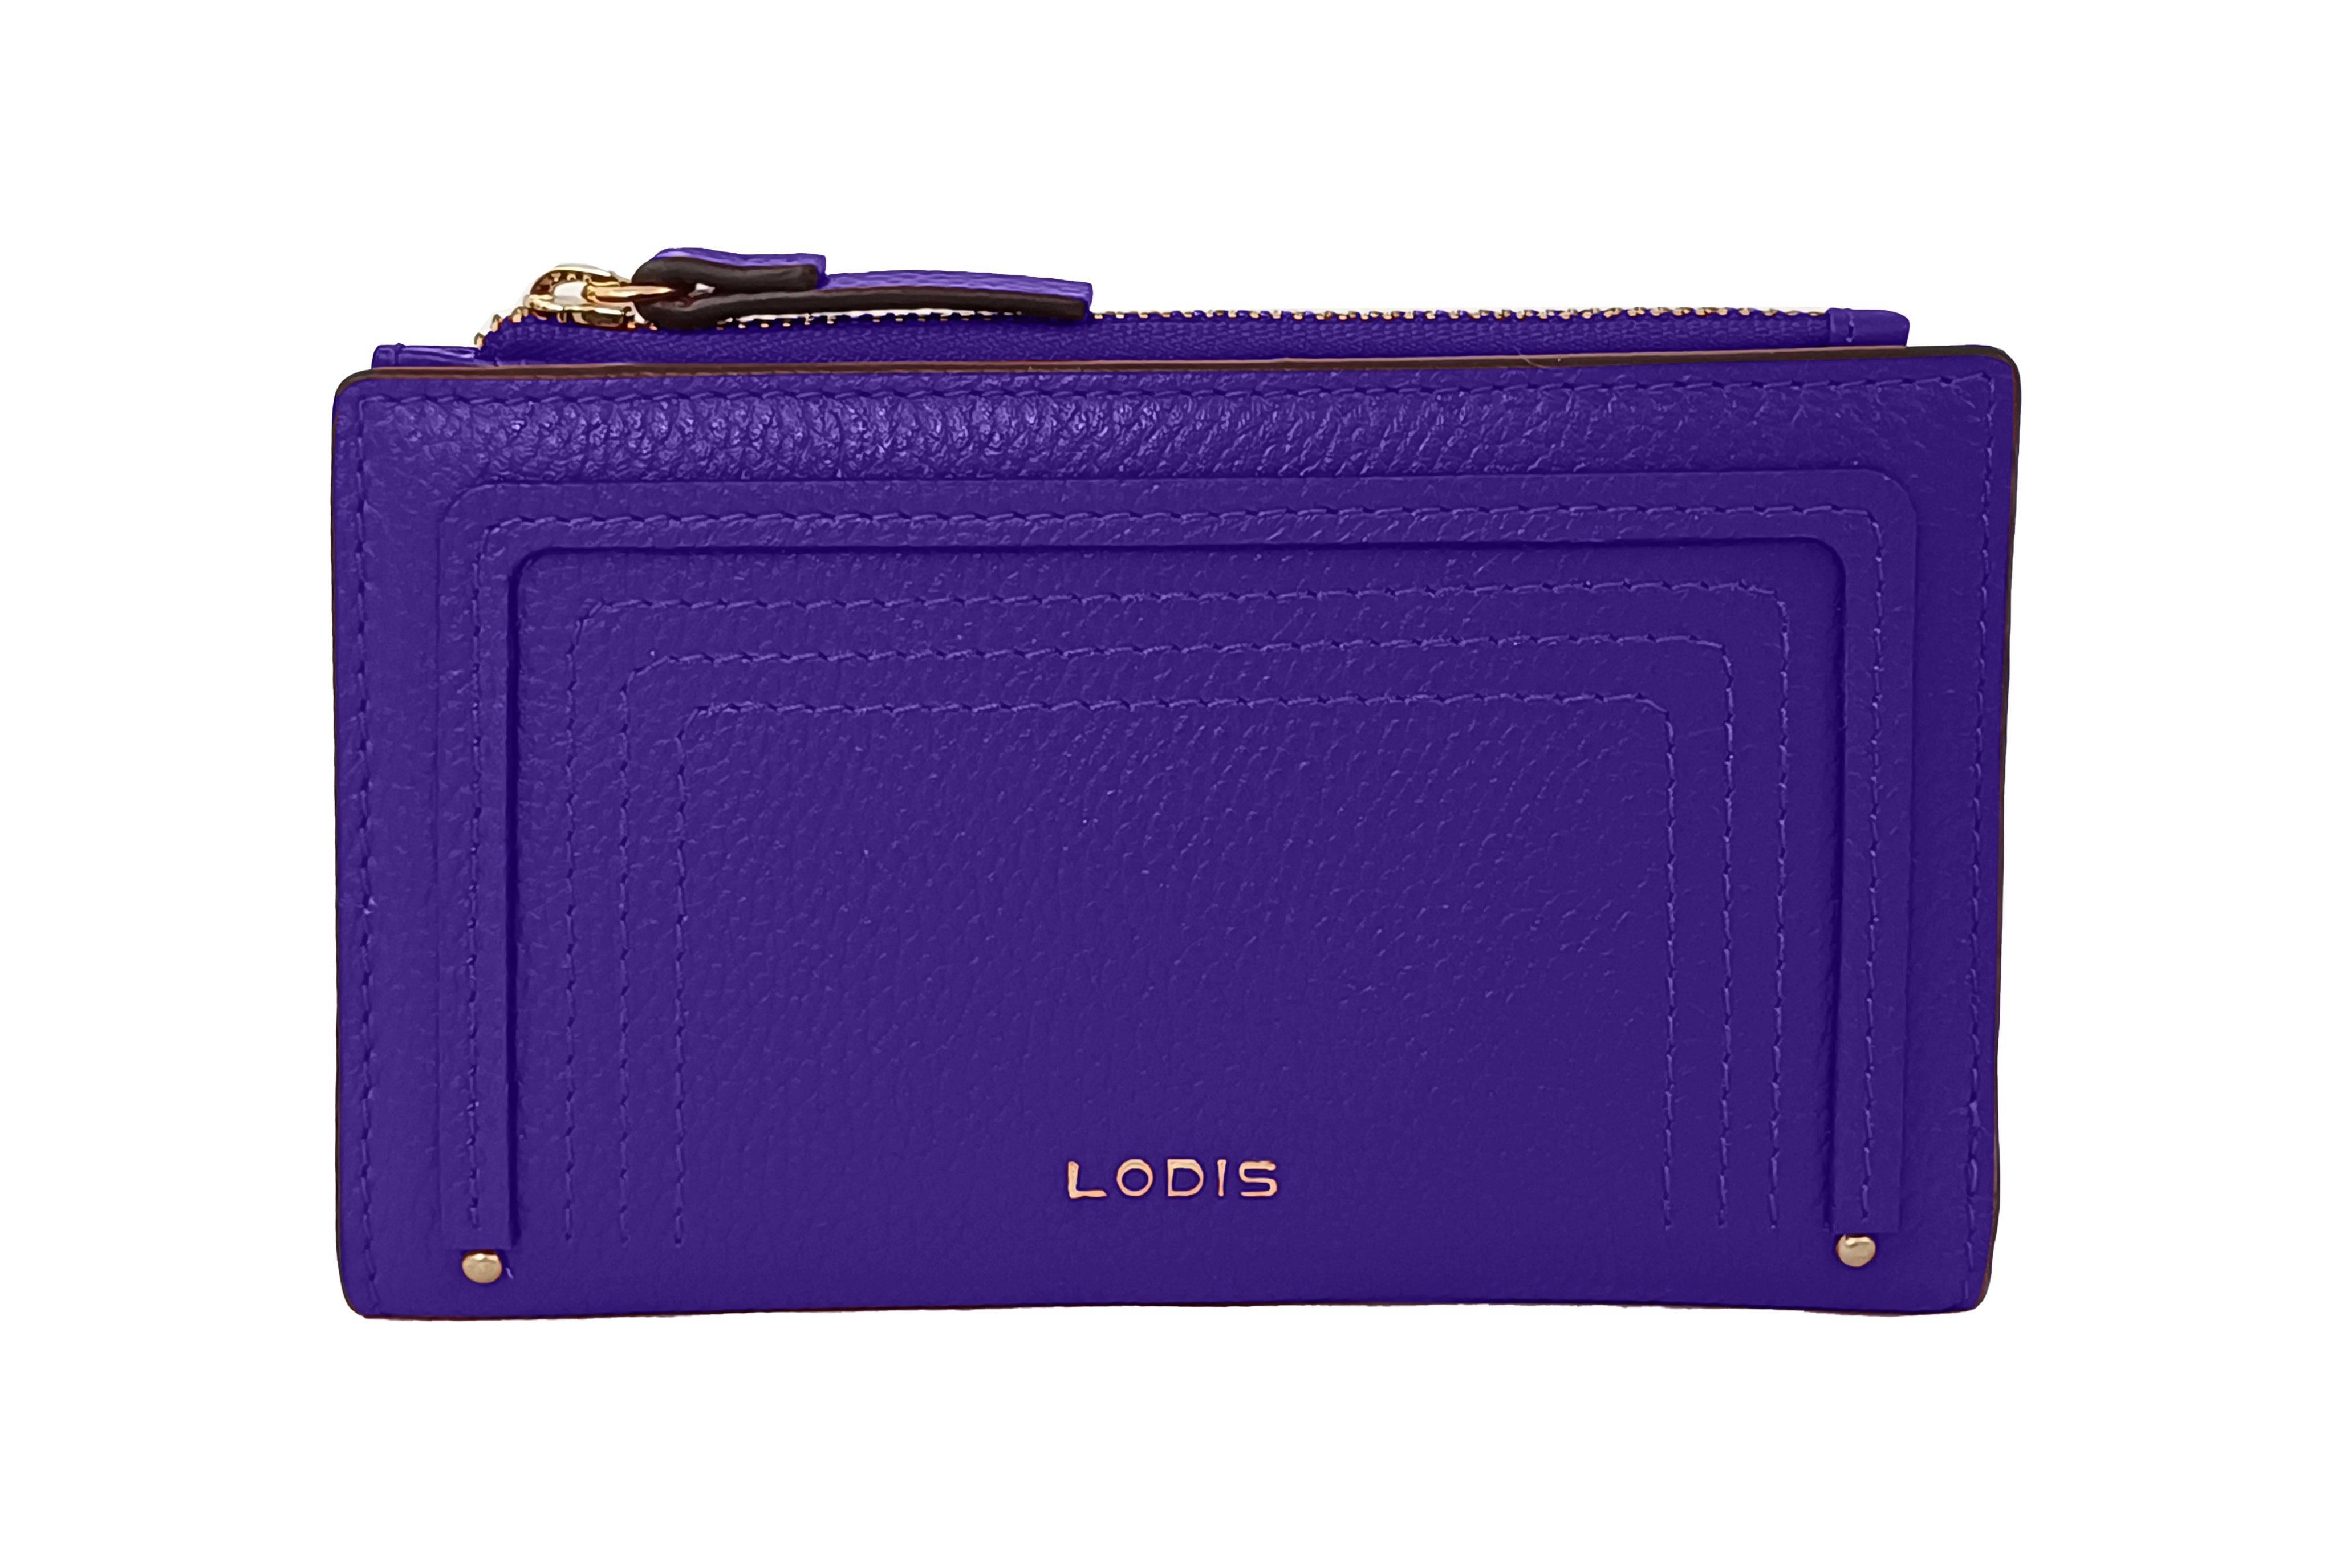 Cute square Women PU Leather Coin Purse Clutch Zipper Business Wallet Bag  Card Holder Small Money Bags Female Purse Wallet Color: Purple | Uquid  shopping cart: Online shopping with crypto currencies